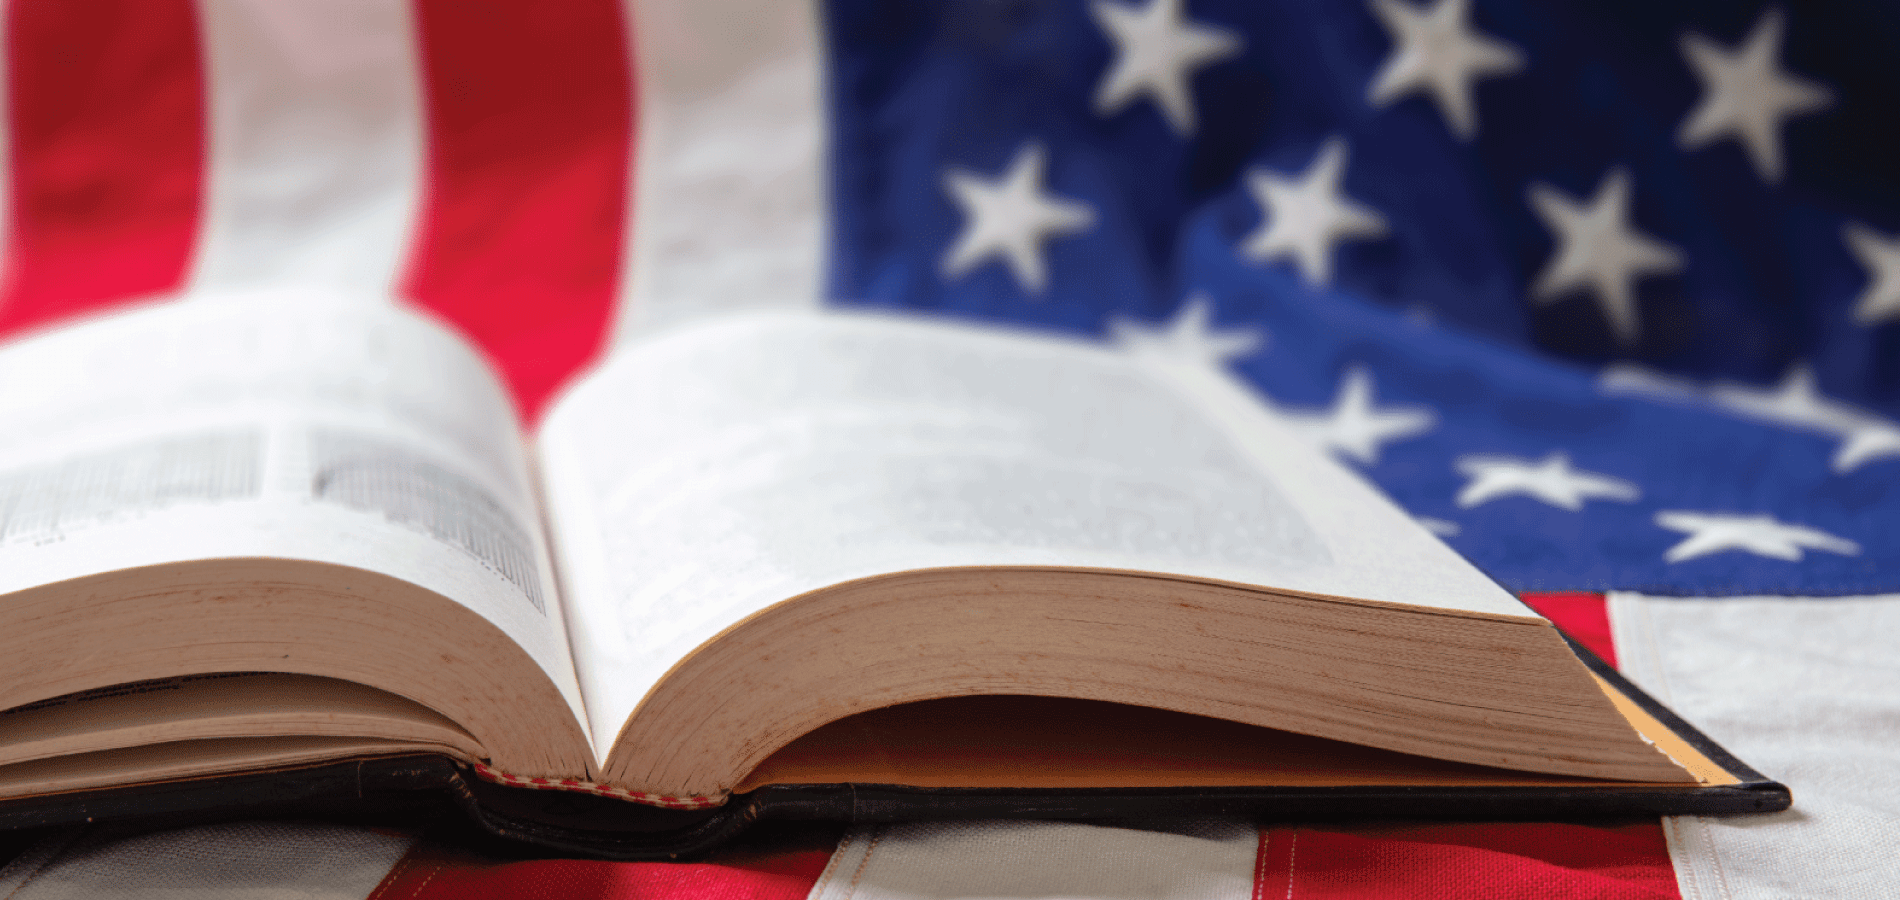 image of the American flag with an open book